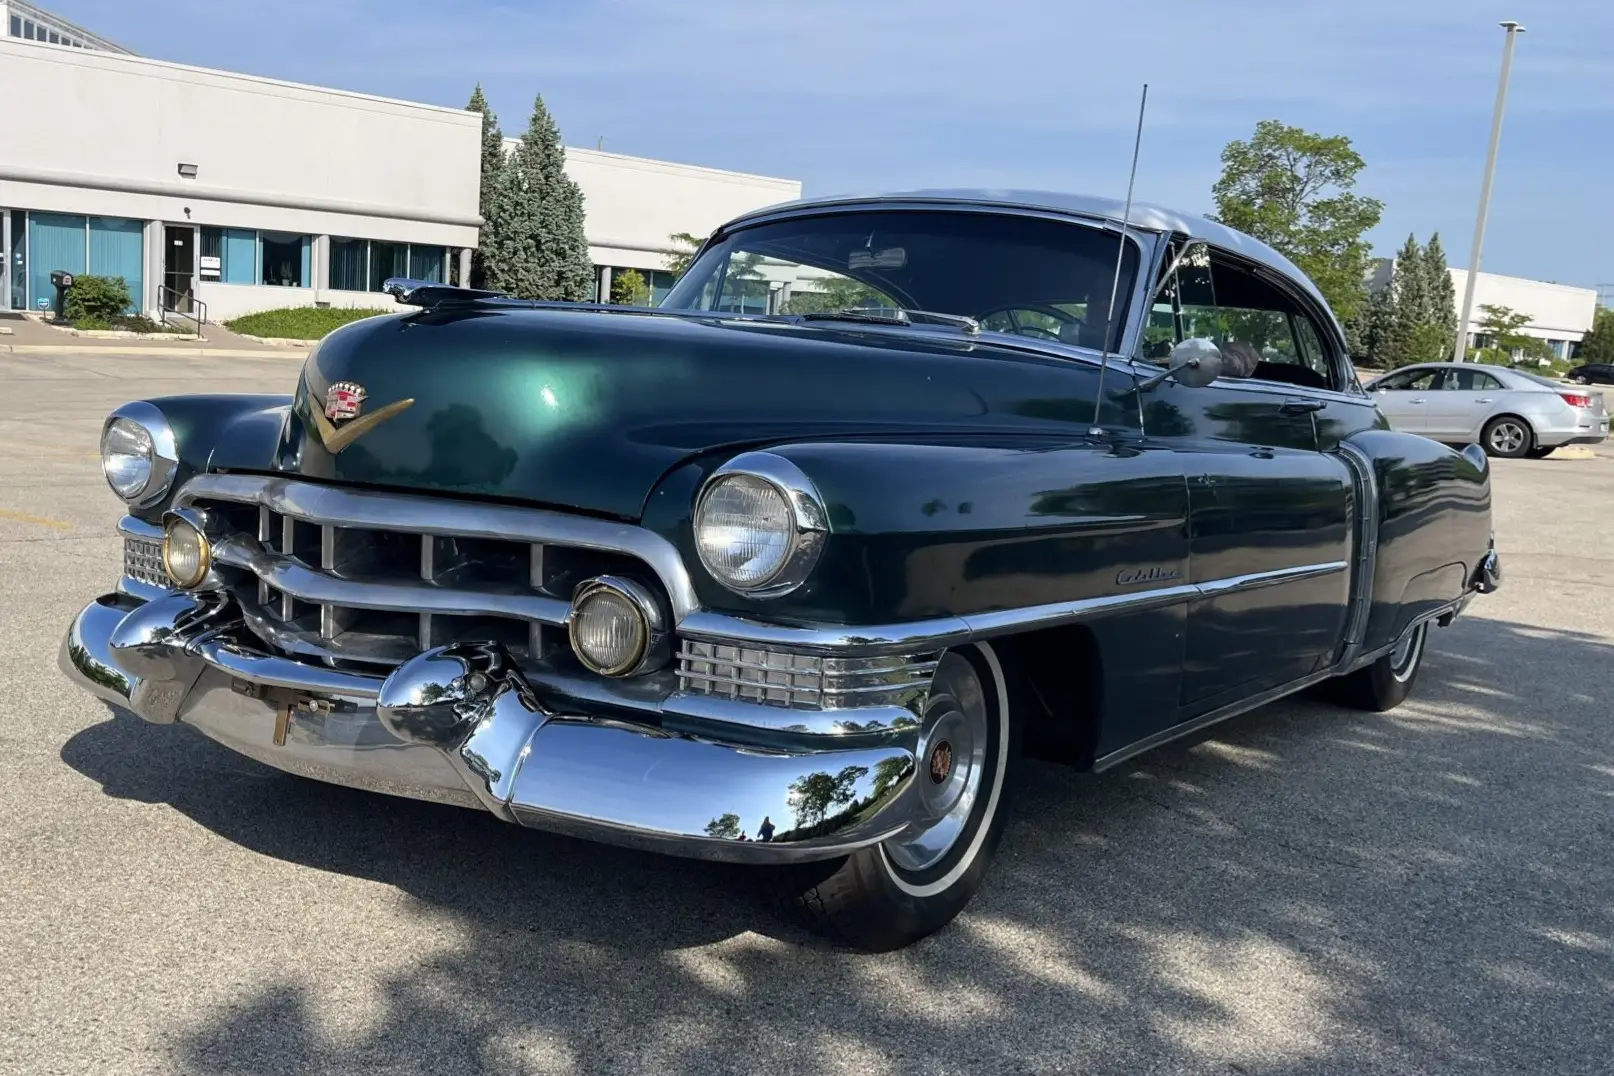 The History of the Iconic 1953 Cadillac Coupe DeVille